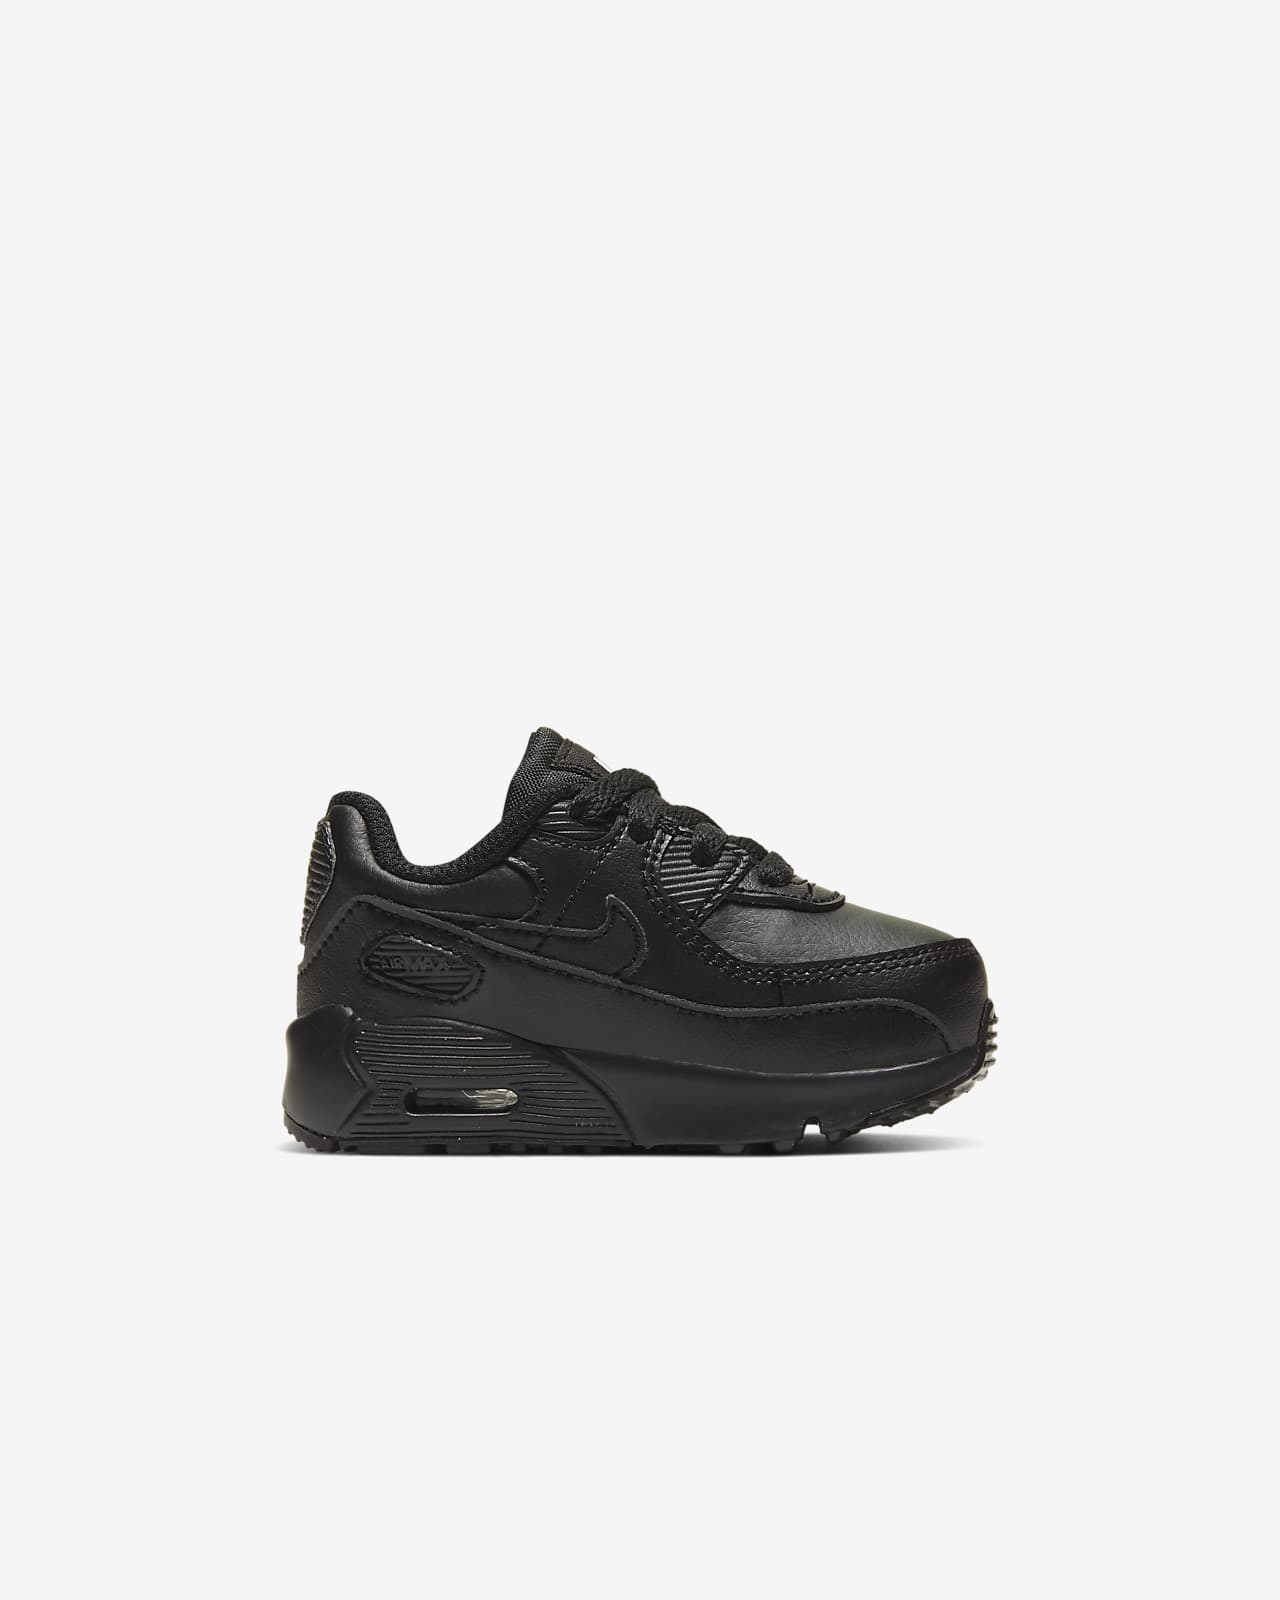 Nike Air Max 90 Baby and Toddler Shoe 